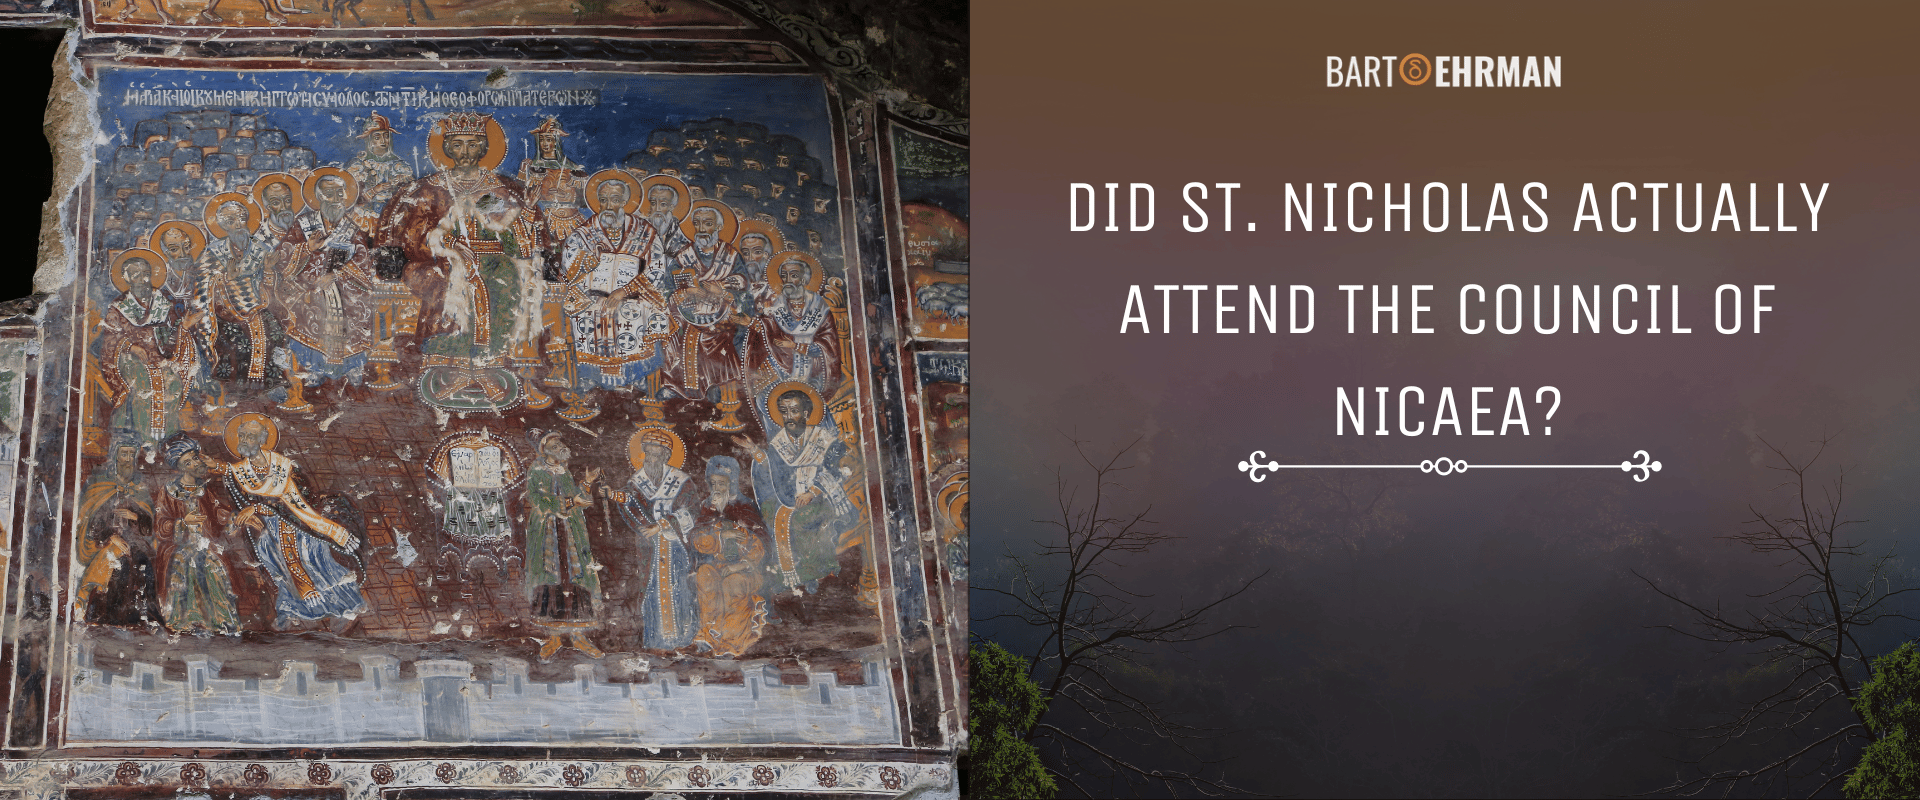 Did St. Nicholas Actually Attend the Council of Nicaea